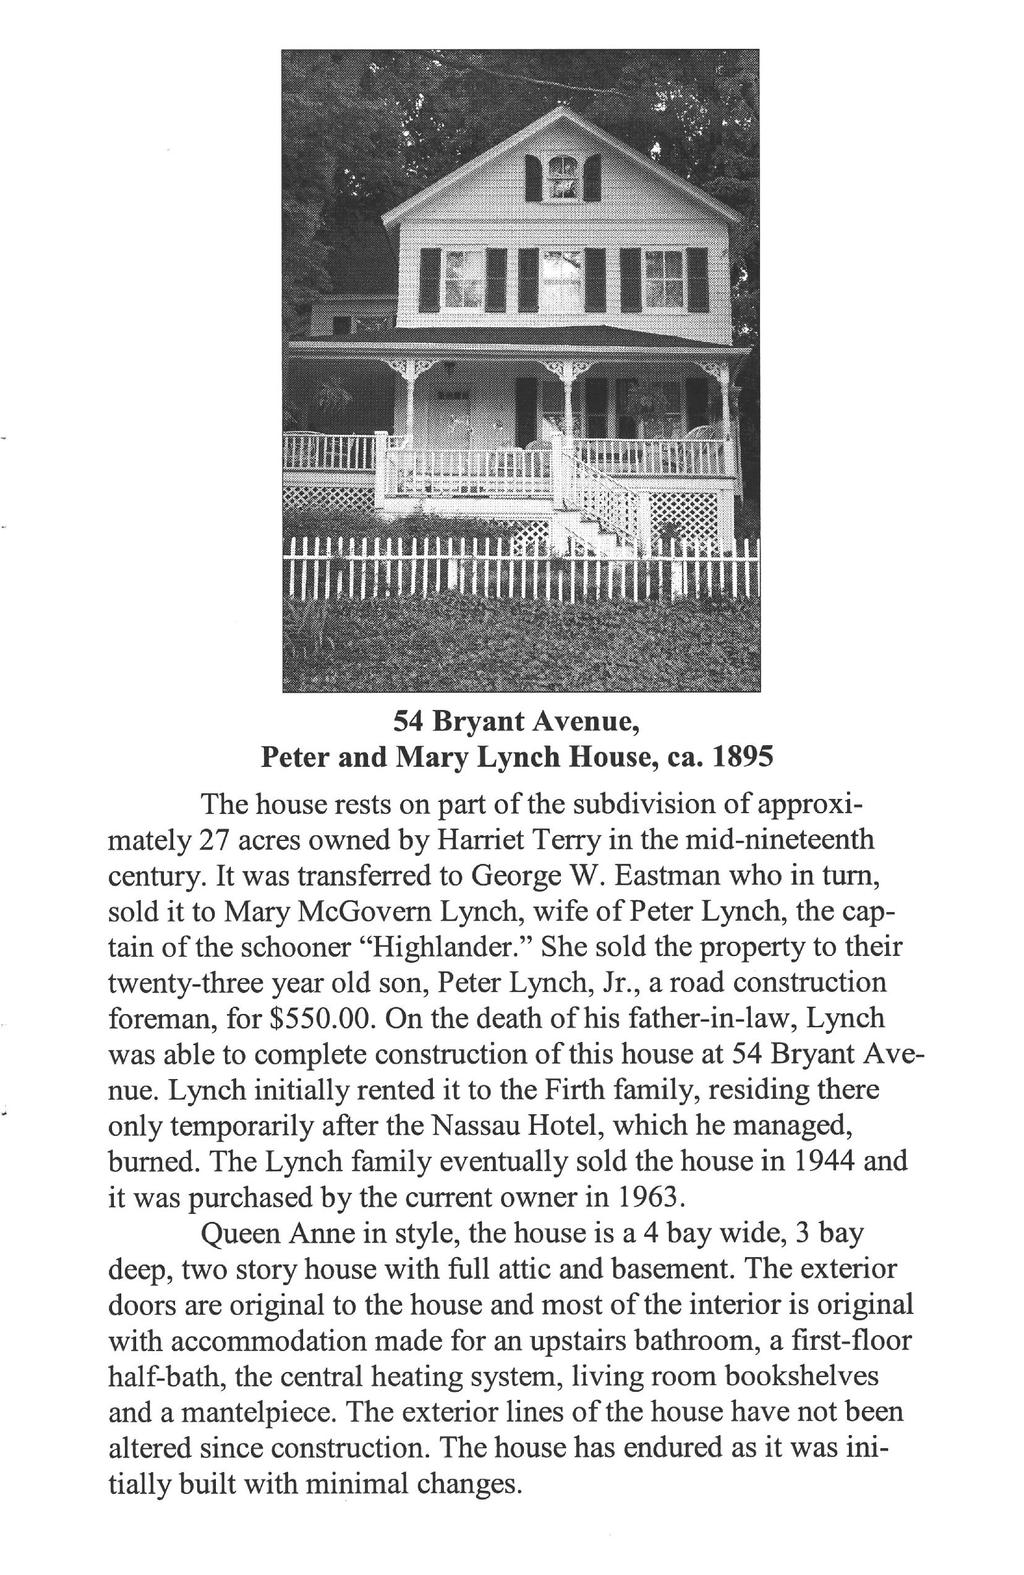 54 Bryant Avenue, Peter and Mary Lynch House, ca. 1895 The house rests on part of the subdivision of approximately 27 acres owned by Harriet Terry in the mid-nineteenth century.